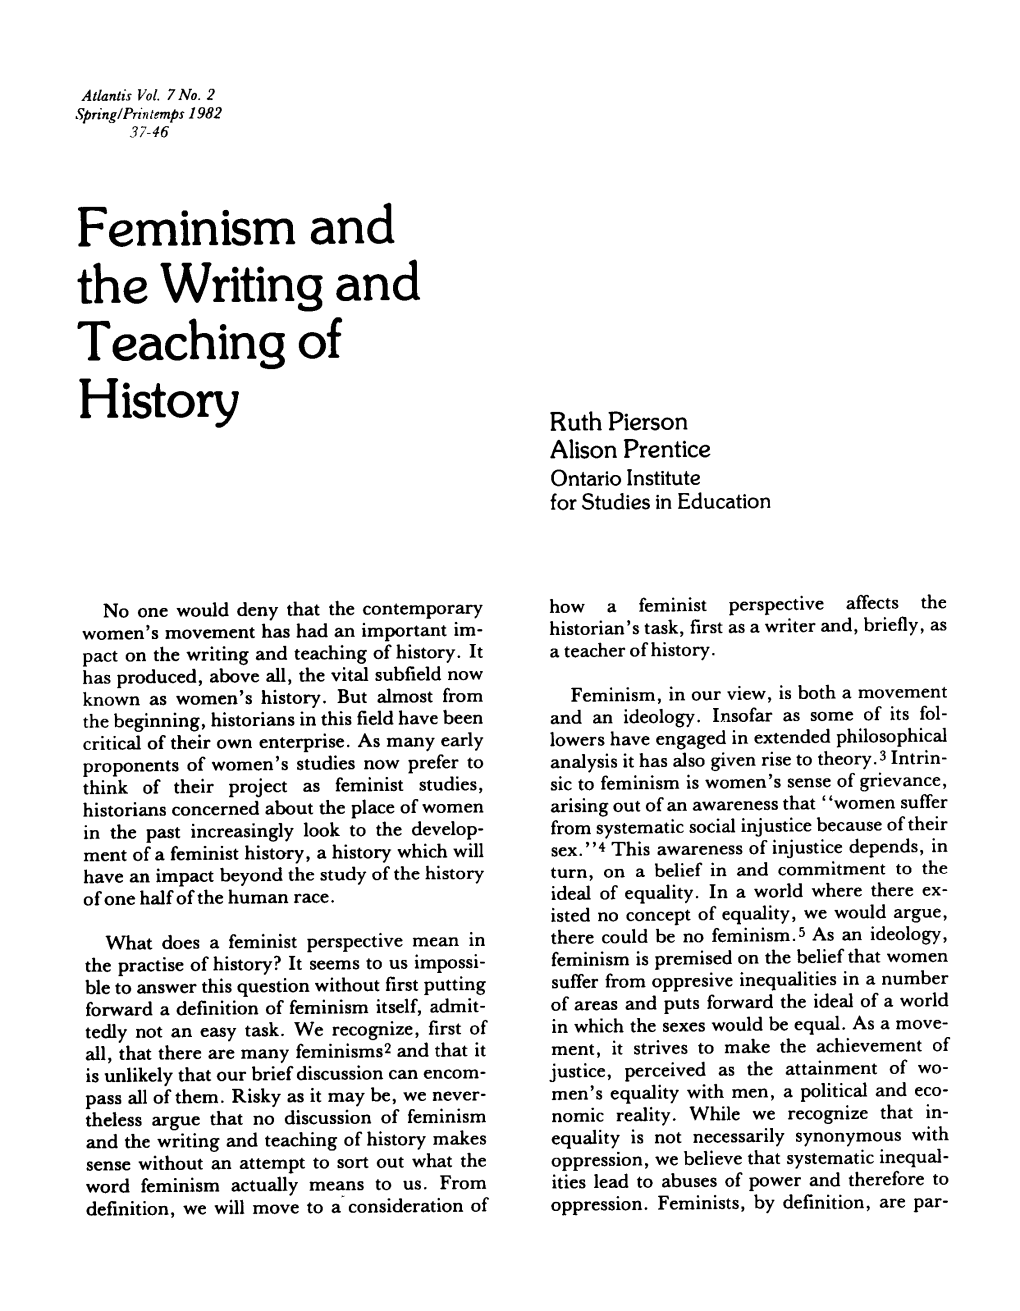 Feminism and the Writing and Teaching of History